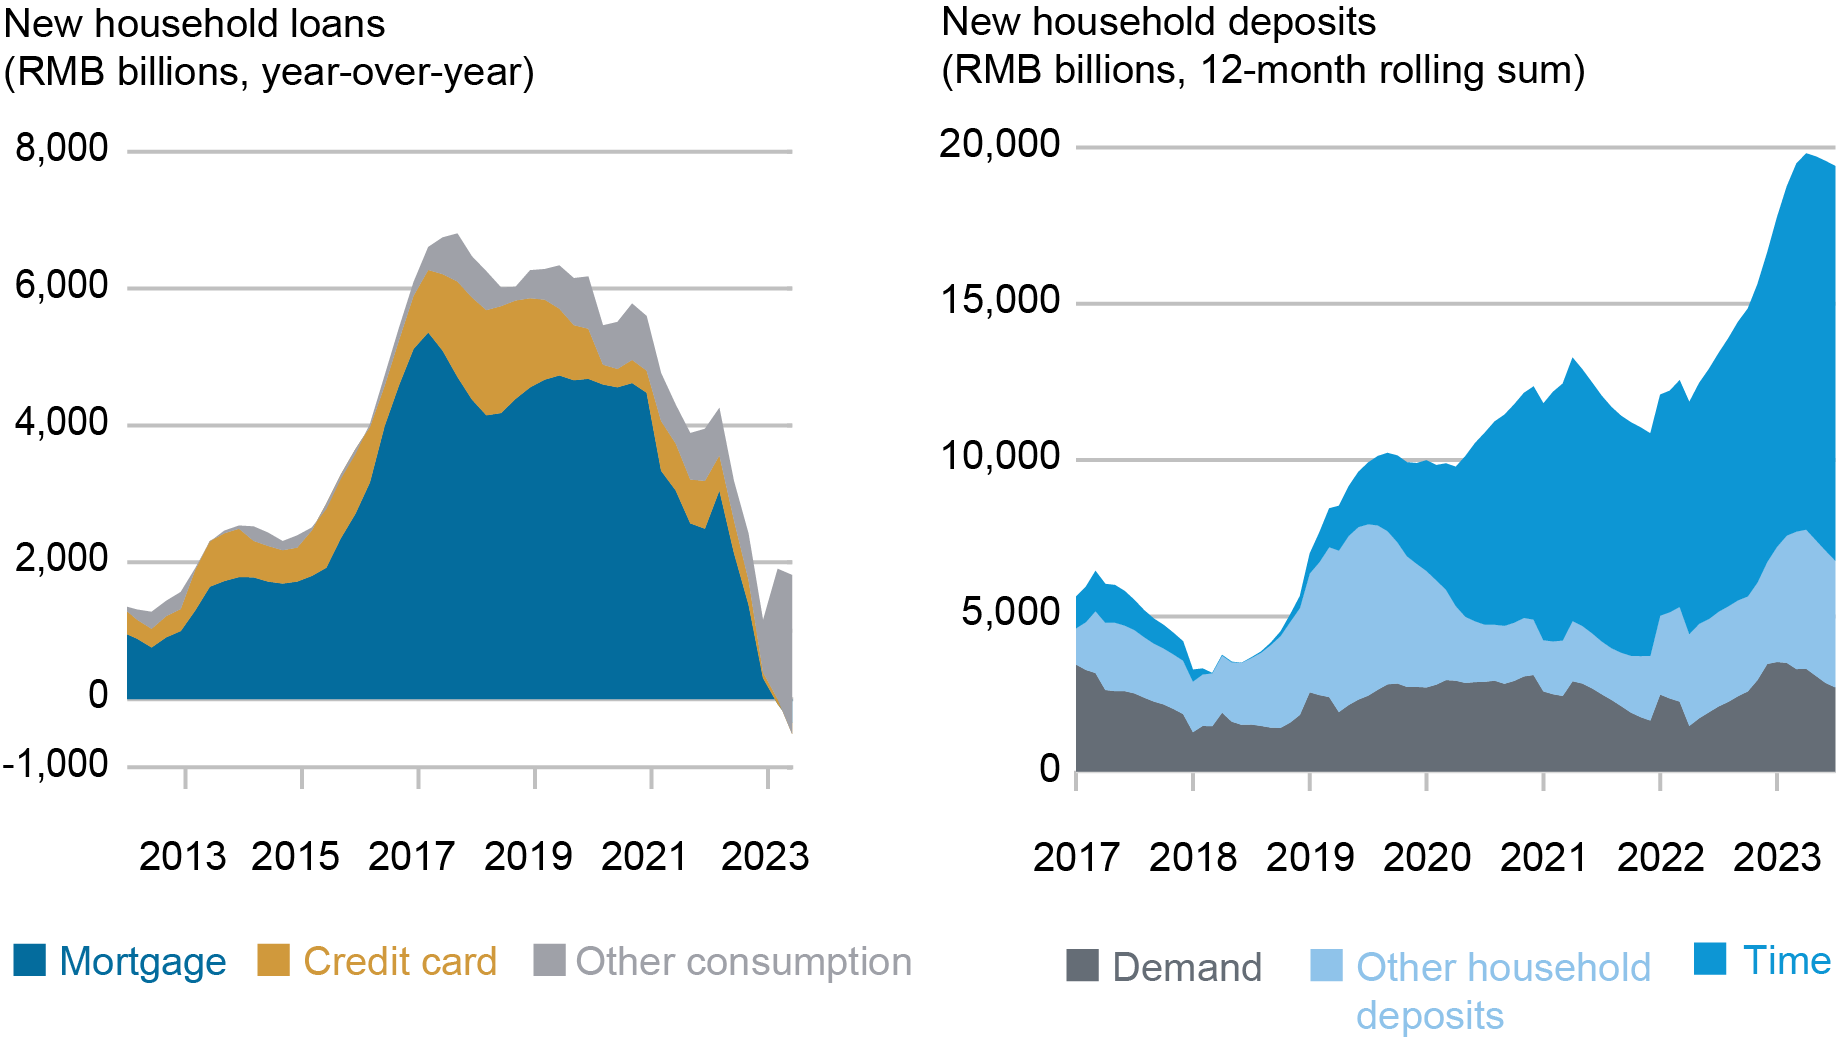 Two-panel Liberty Street Economics area charts. The left panel shows the amount of mortgage loans outstanding as well as other forms of consumer credit have slowed sharply between 2012 and 2023. The right panel shows new household deposits in billions of renminbi between 2016 and July 2023.